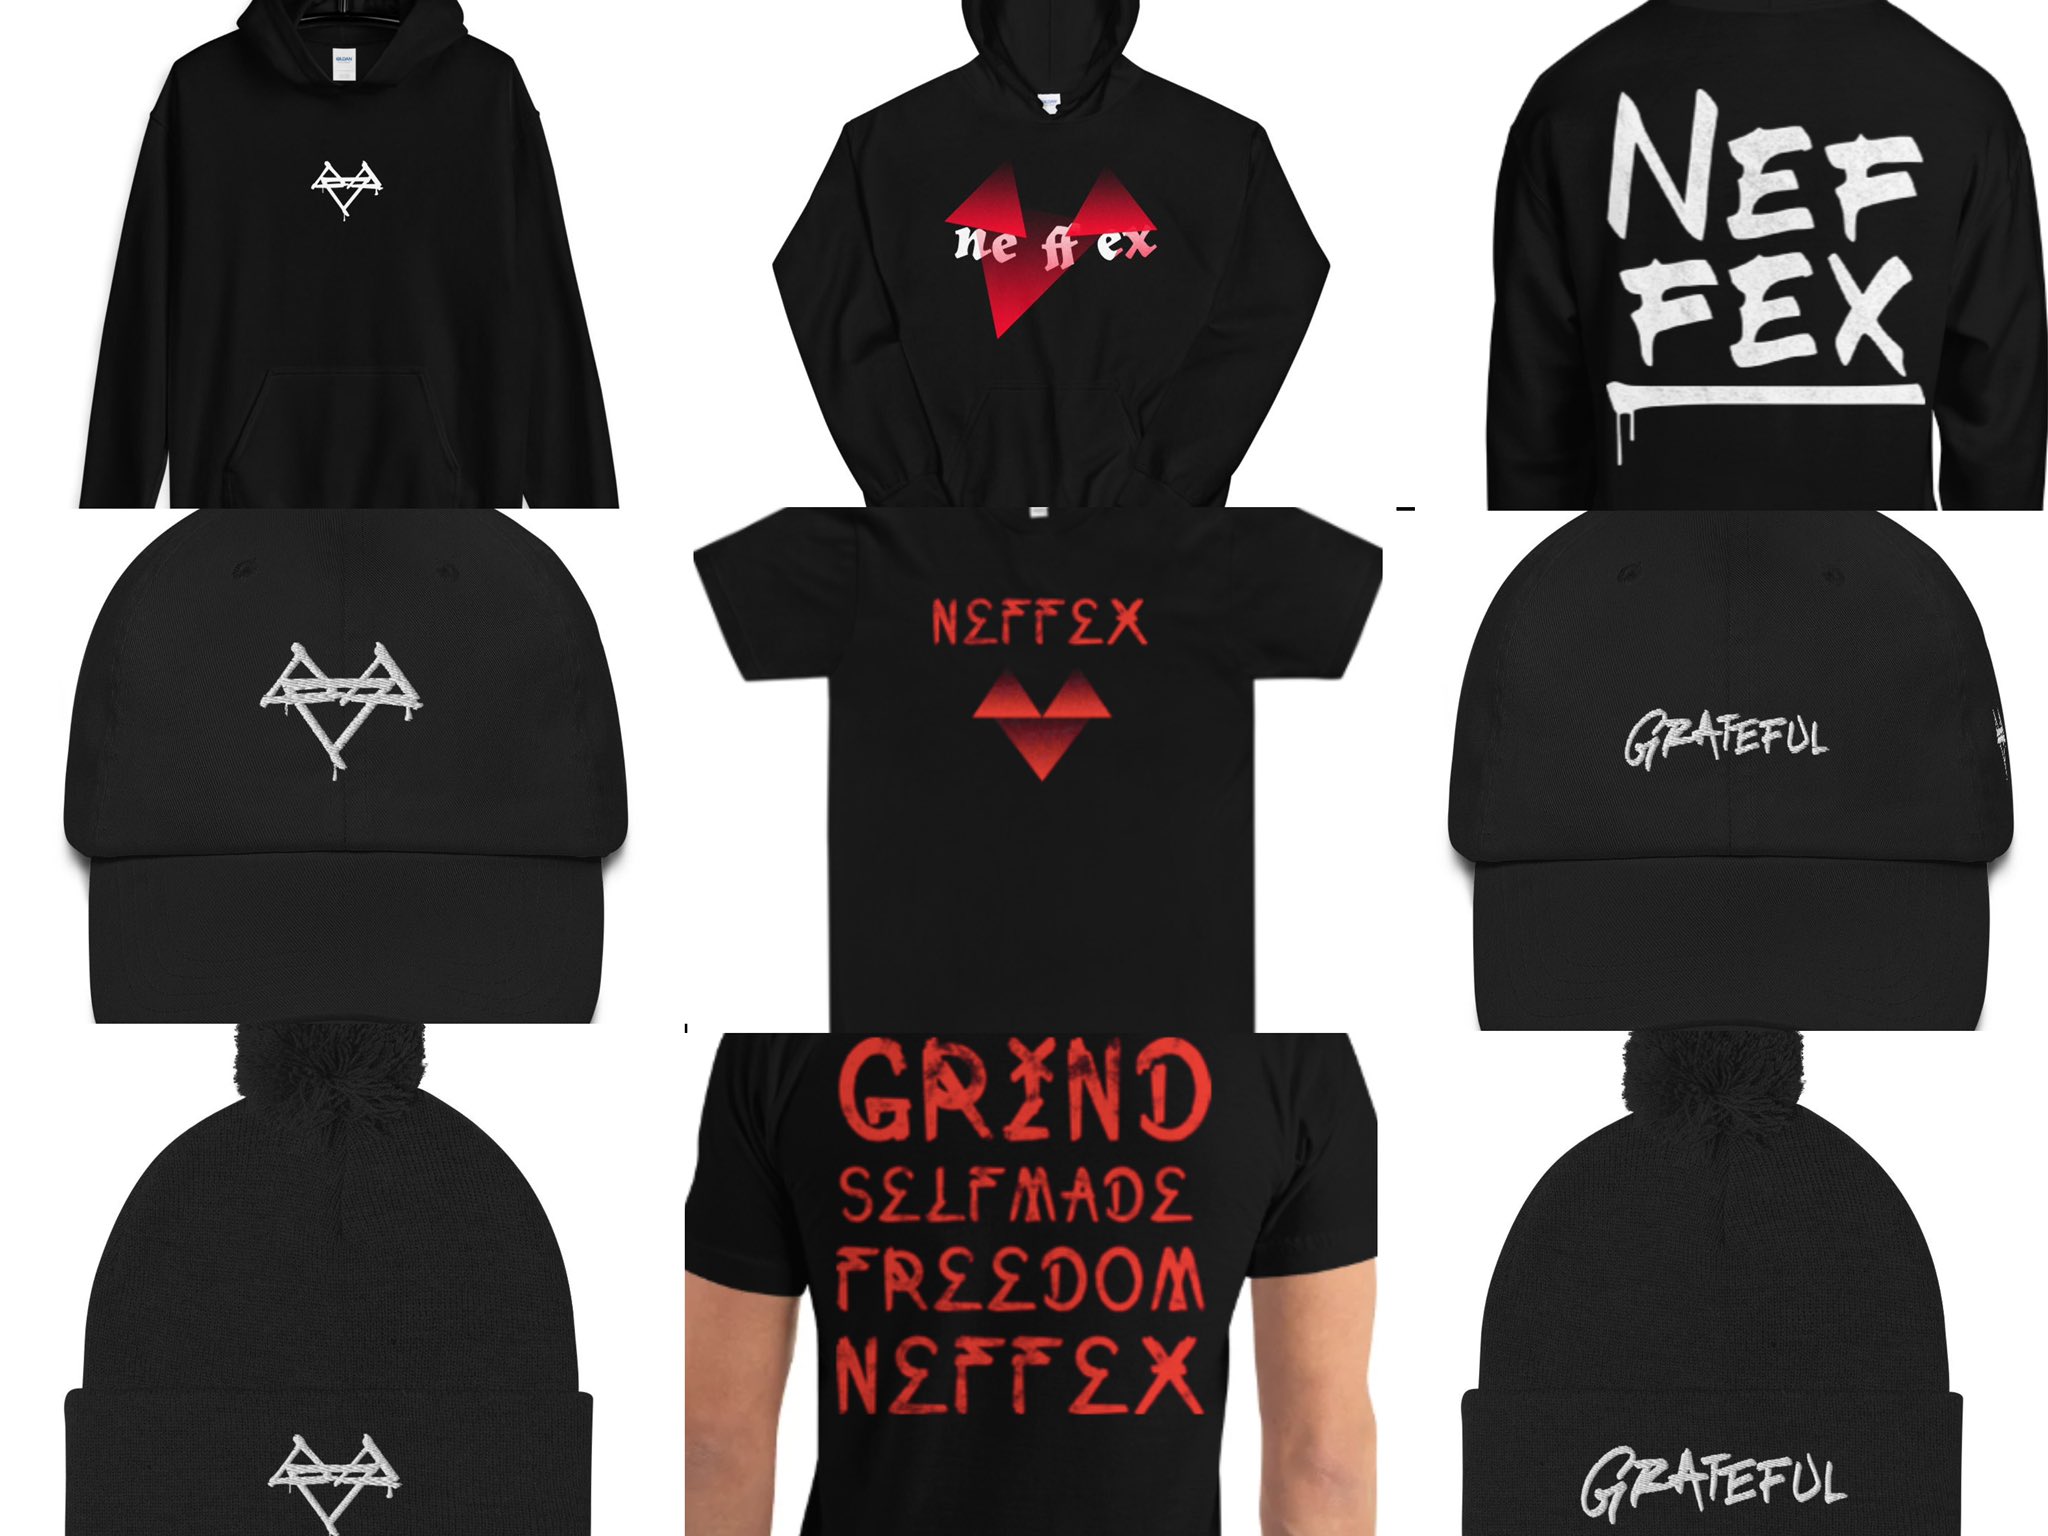 Neffex On Twitter Our New Holiday Merch Collection Is Out Now On